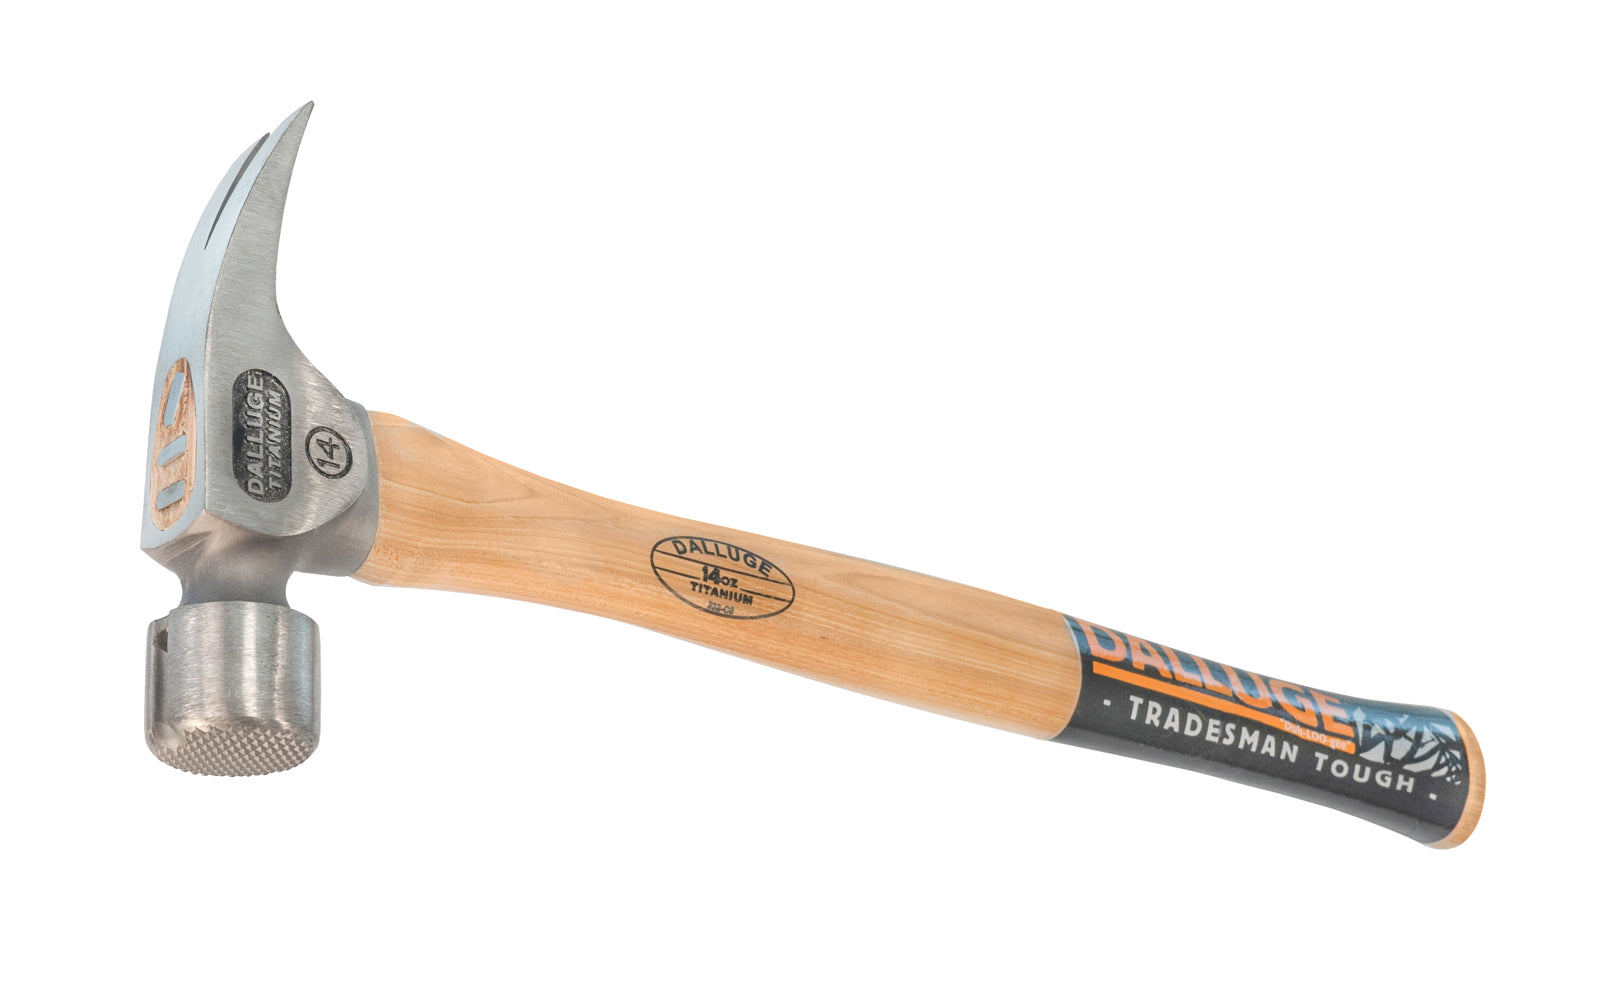 14 oz Titanium Dalluge hammer has a lightweight titanium head which provides a faster swing with less effort. Hammer provides faster & greater power at point of impact with less stress & arm fatigue, & has the "NaiLoc" magnetic nail holder. Mill waffle face. Straight Hickory hardwood handle. Model 7170. 698250071705